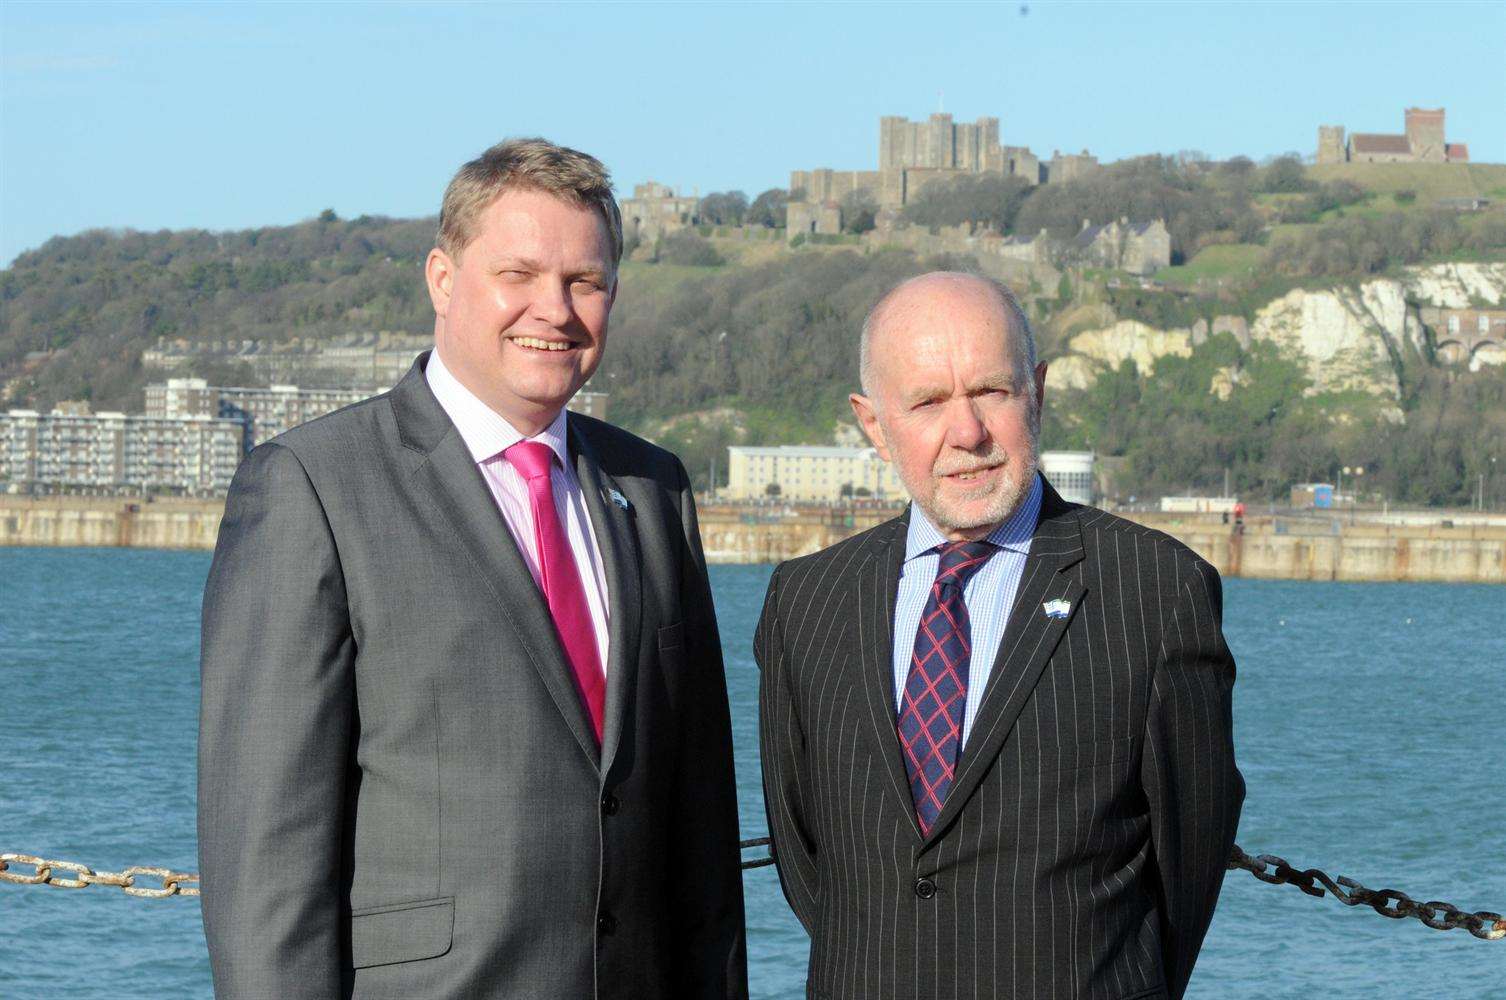 Chief executive, Tim Waggott, left, and the chairman George Jenkins after the announcement that the Western Docks will receive an overhaul.